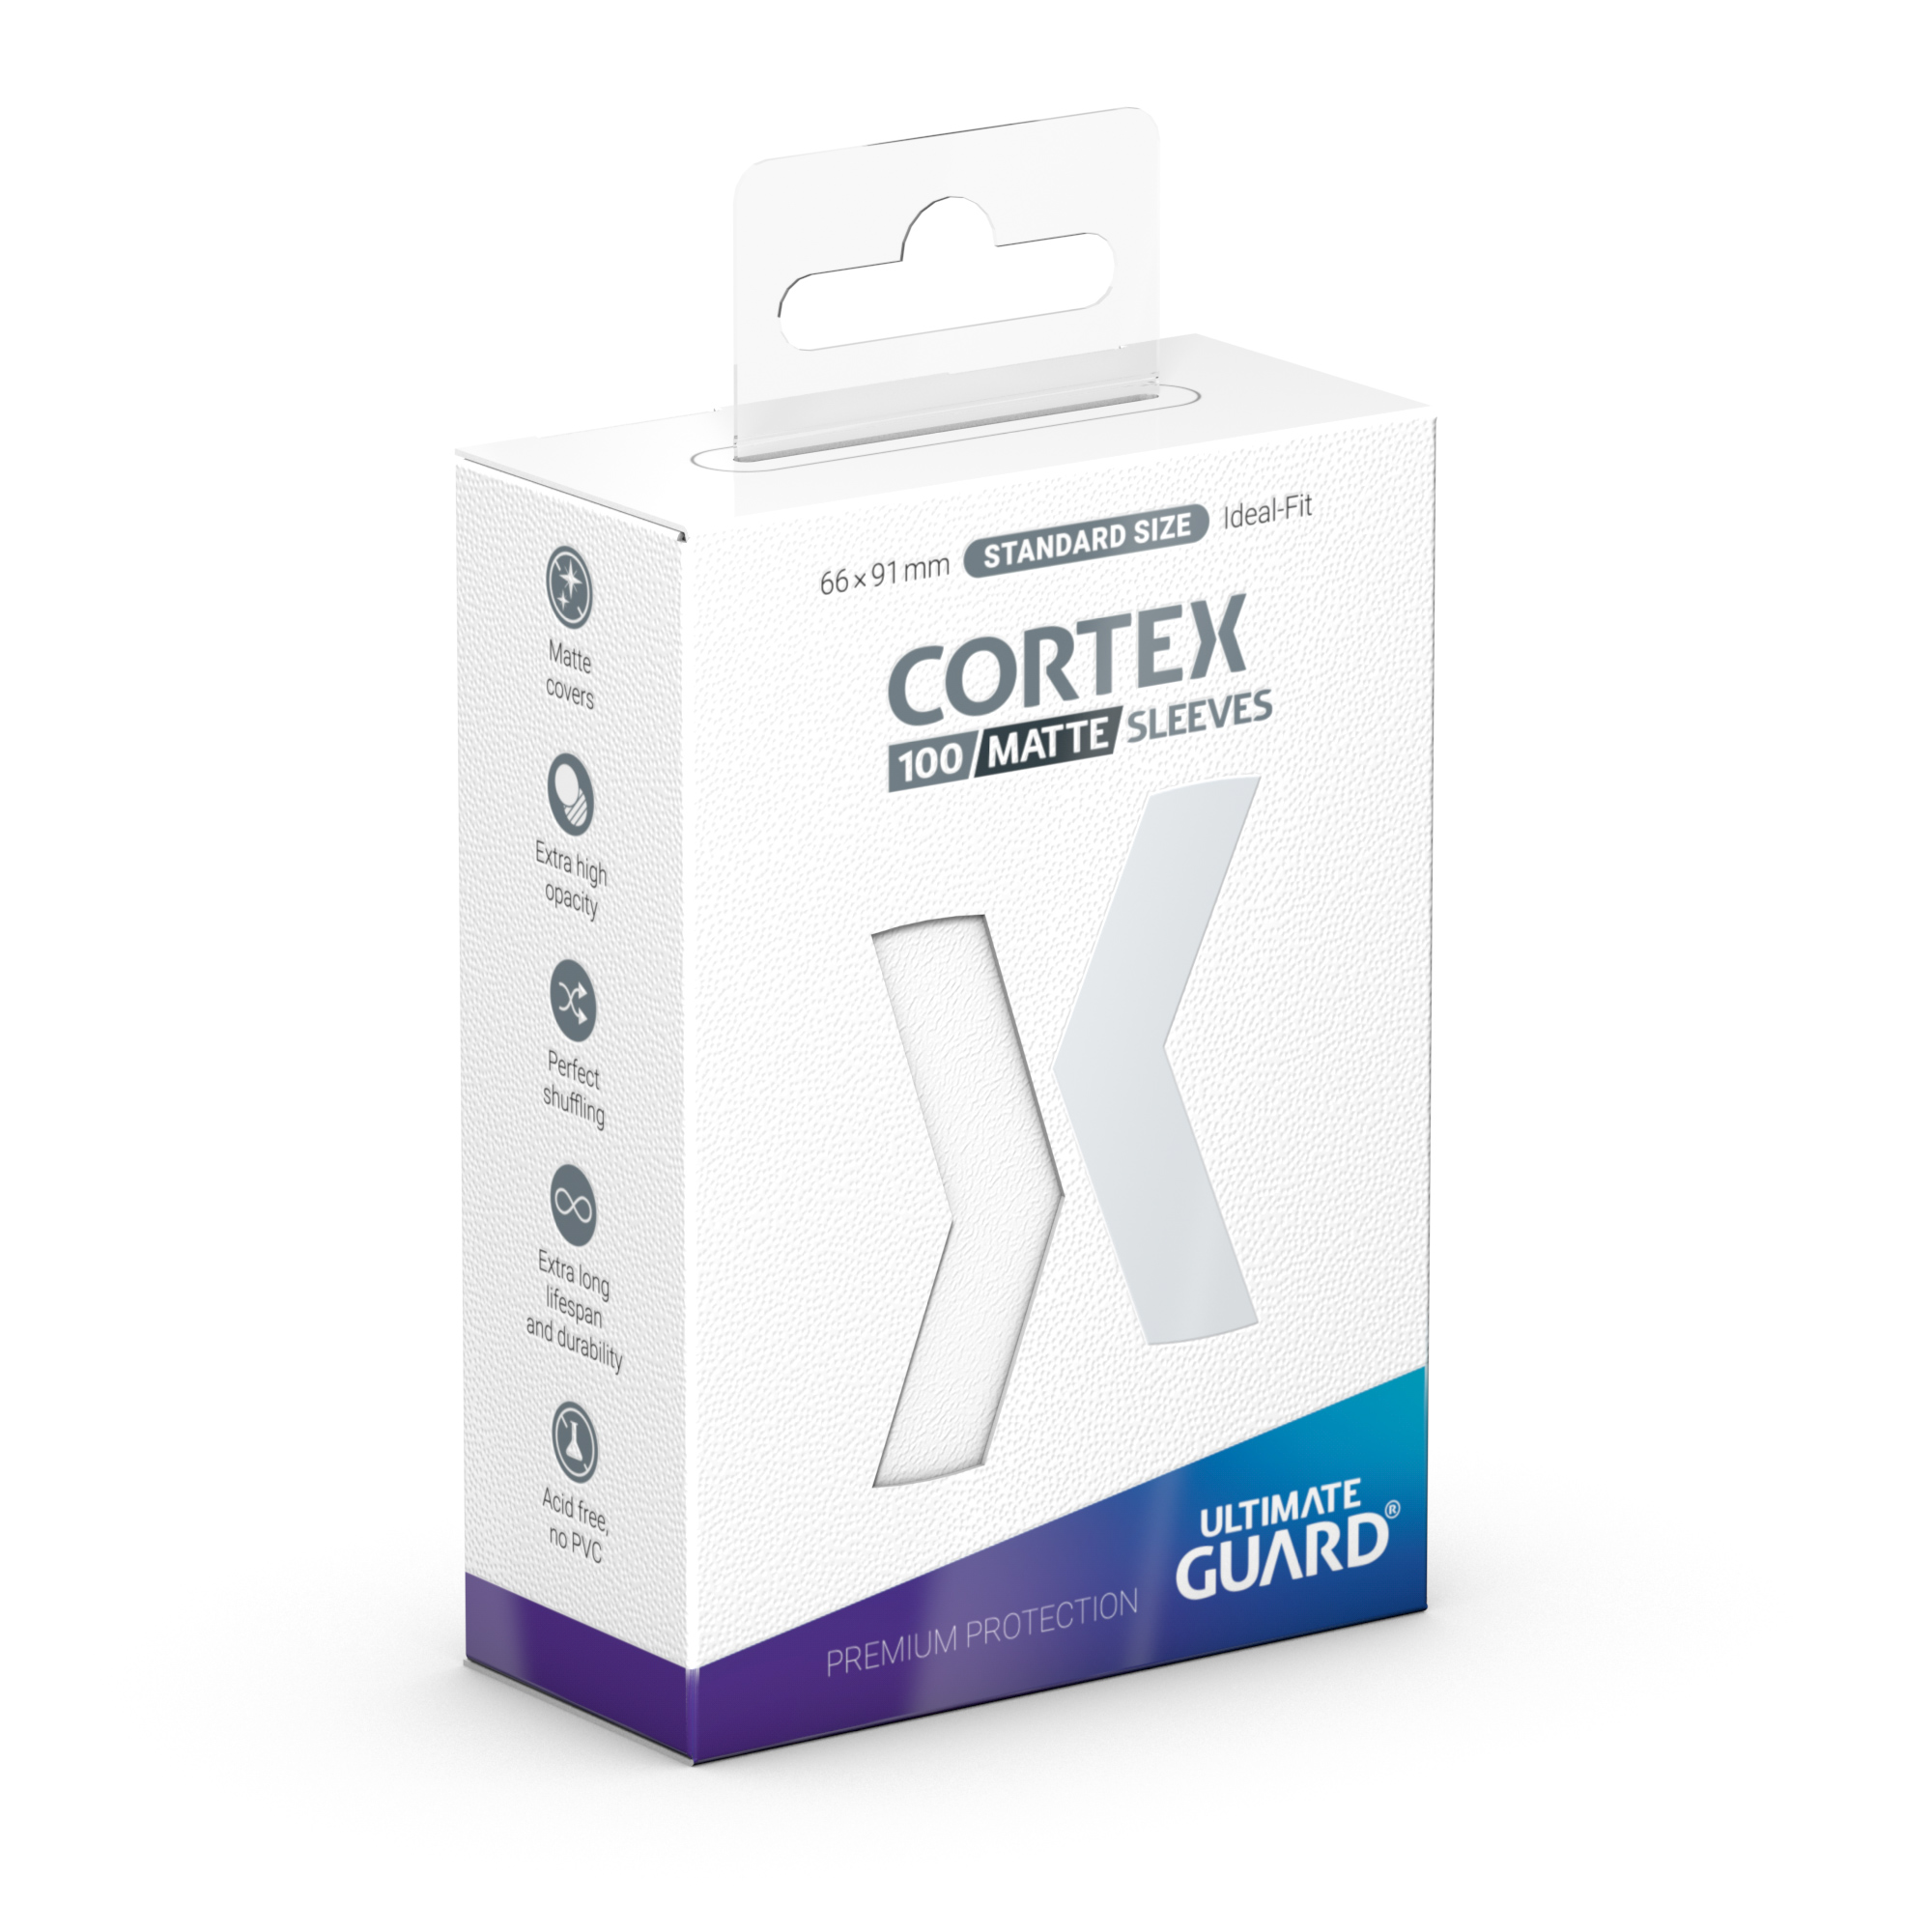 Cortex Sleeves White/Matte - Standard Size - Ultimate Guard